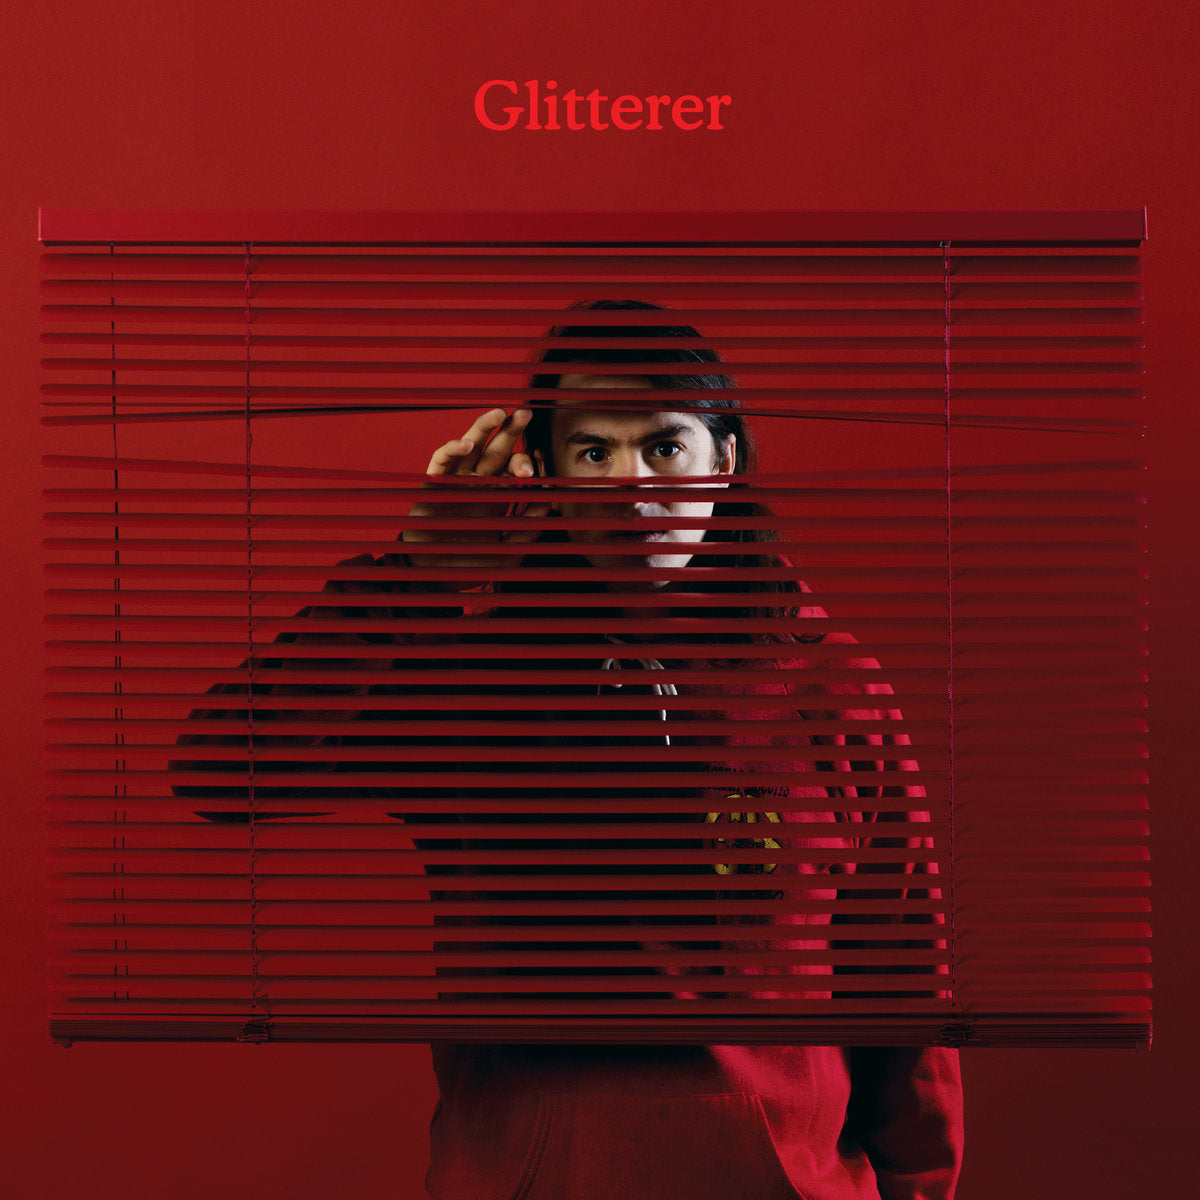 Glitterer "Looking Through The Shades" LP